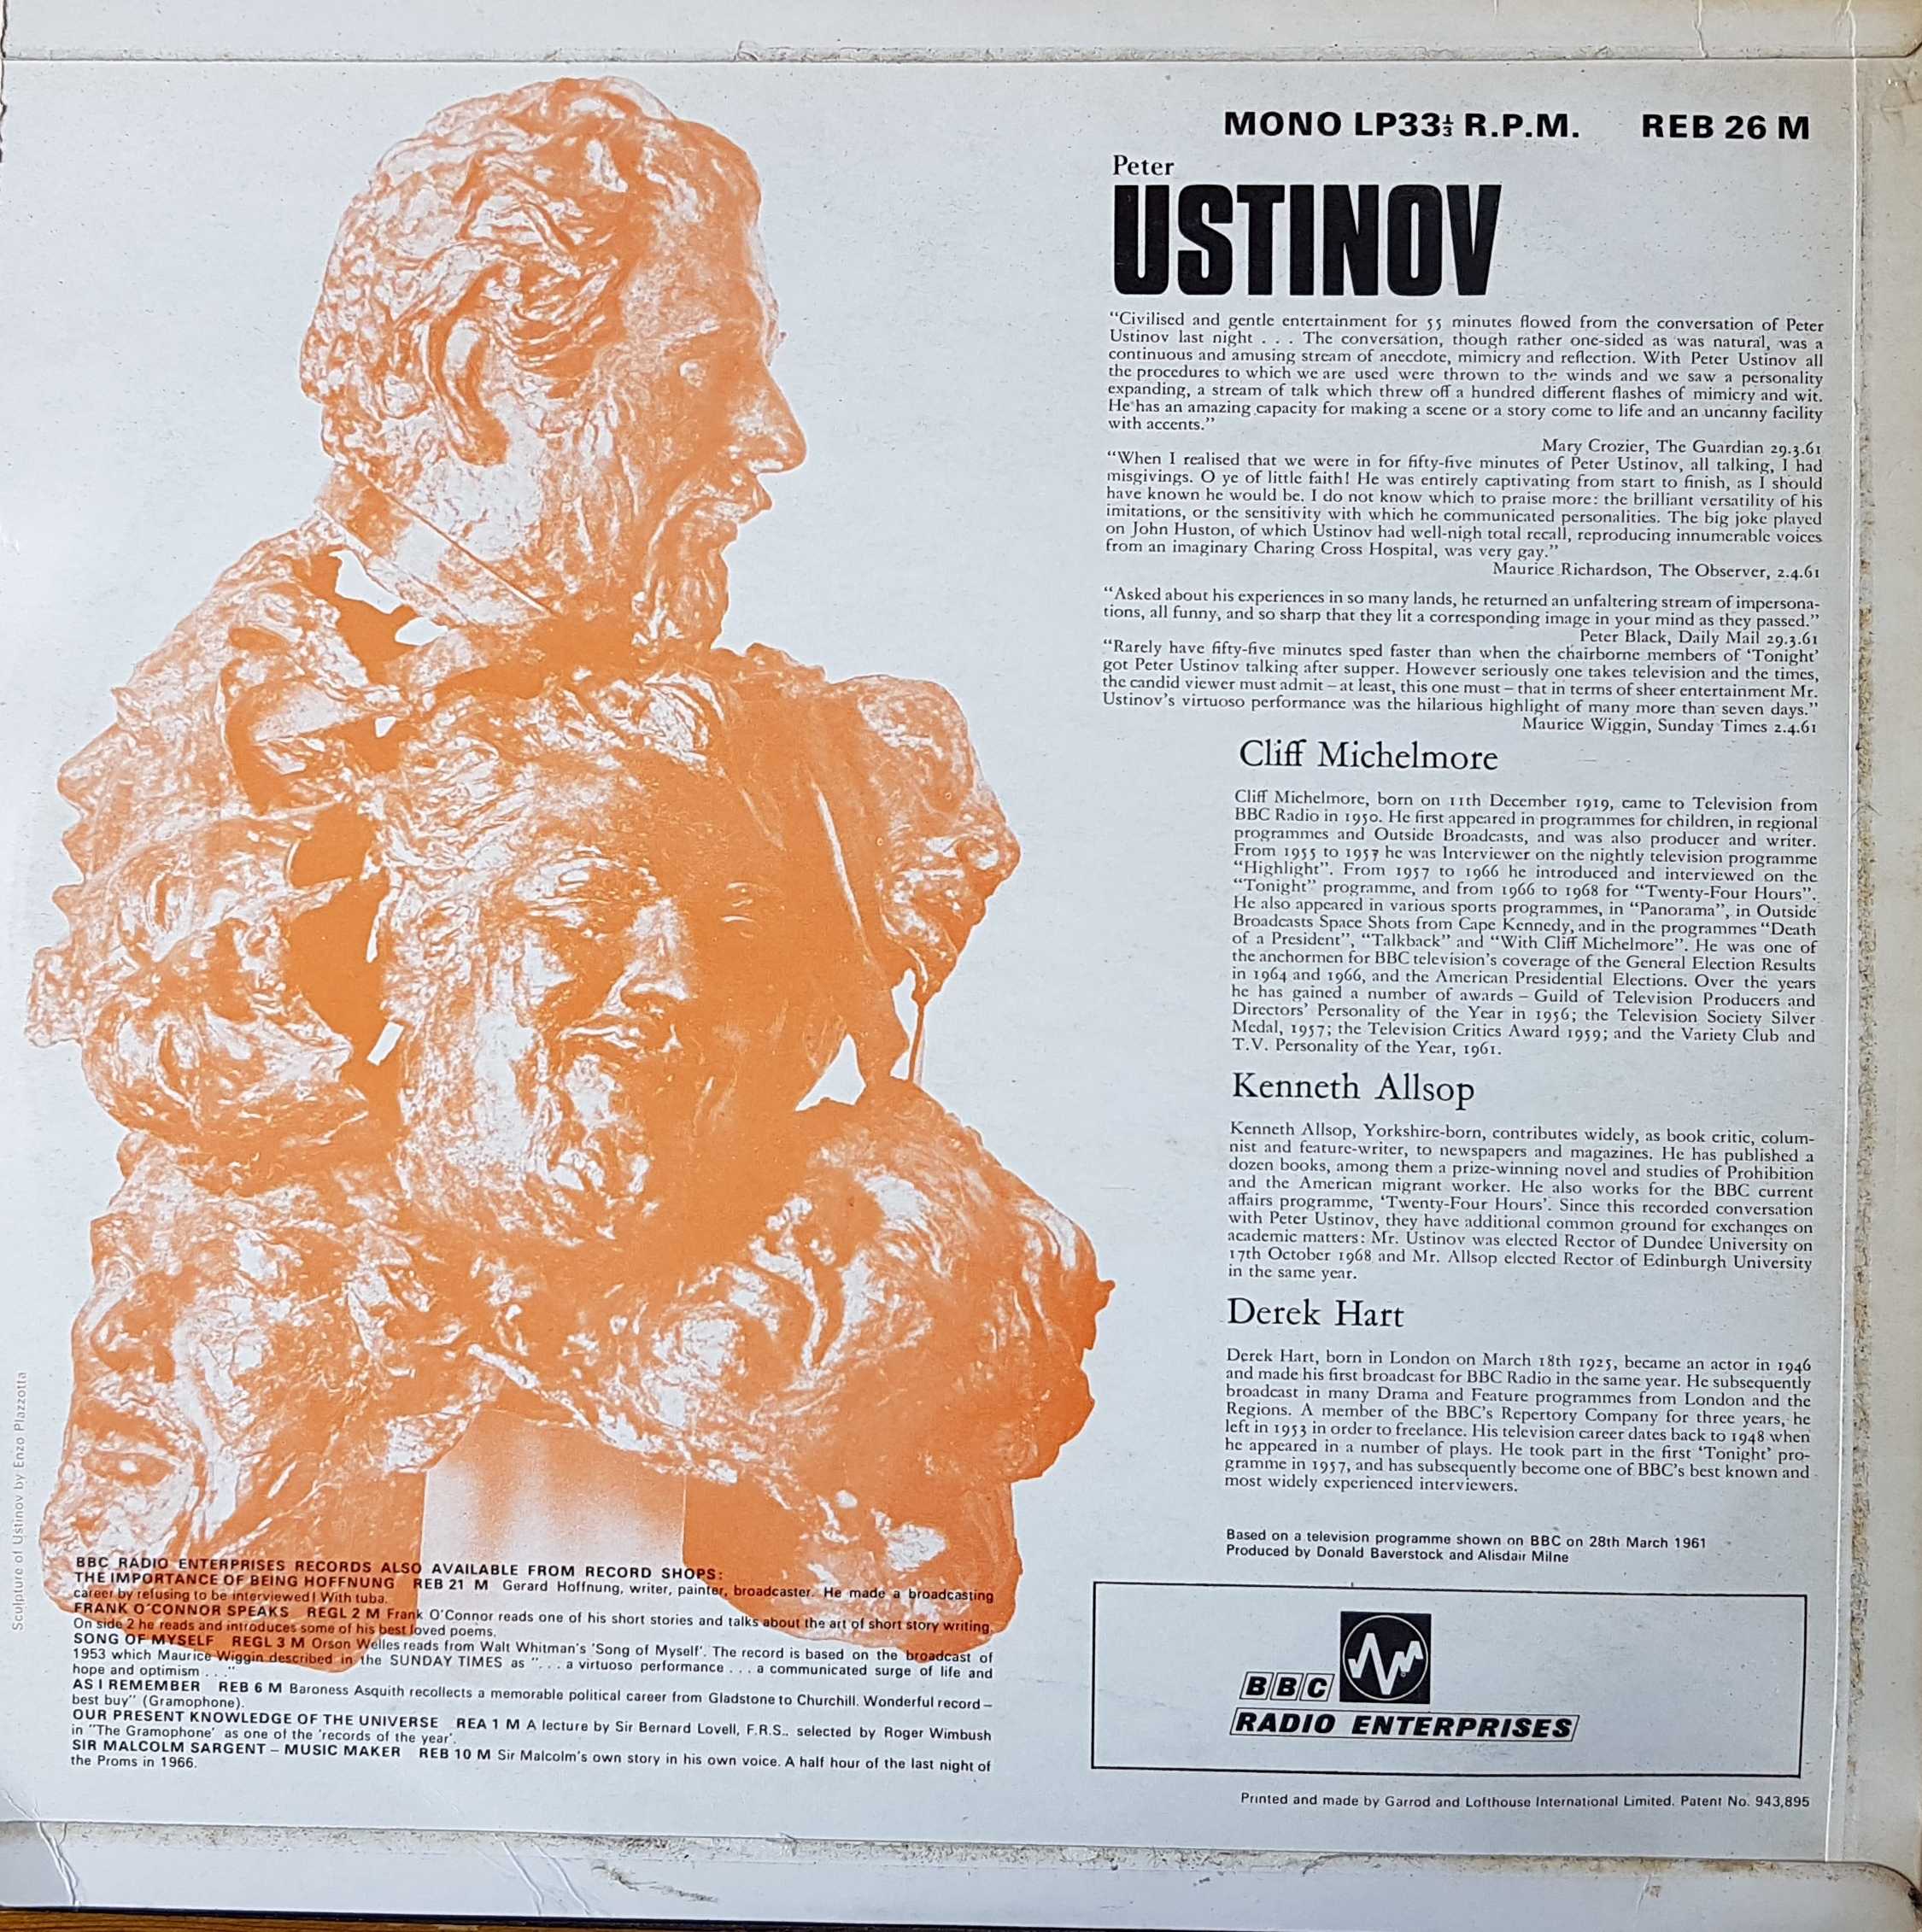 Picture of REB 26 The many voices of Peter Ustinov by artist Peter Ustinov from the BBC records and Tapes library